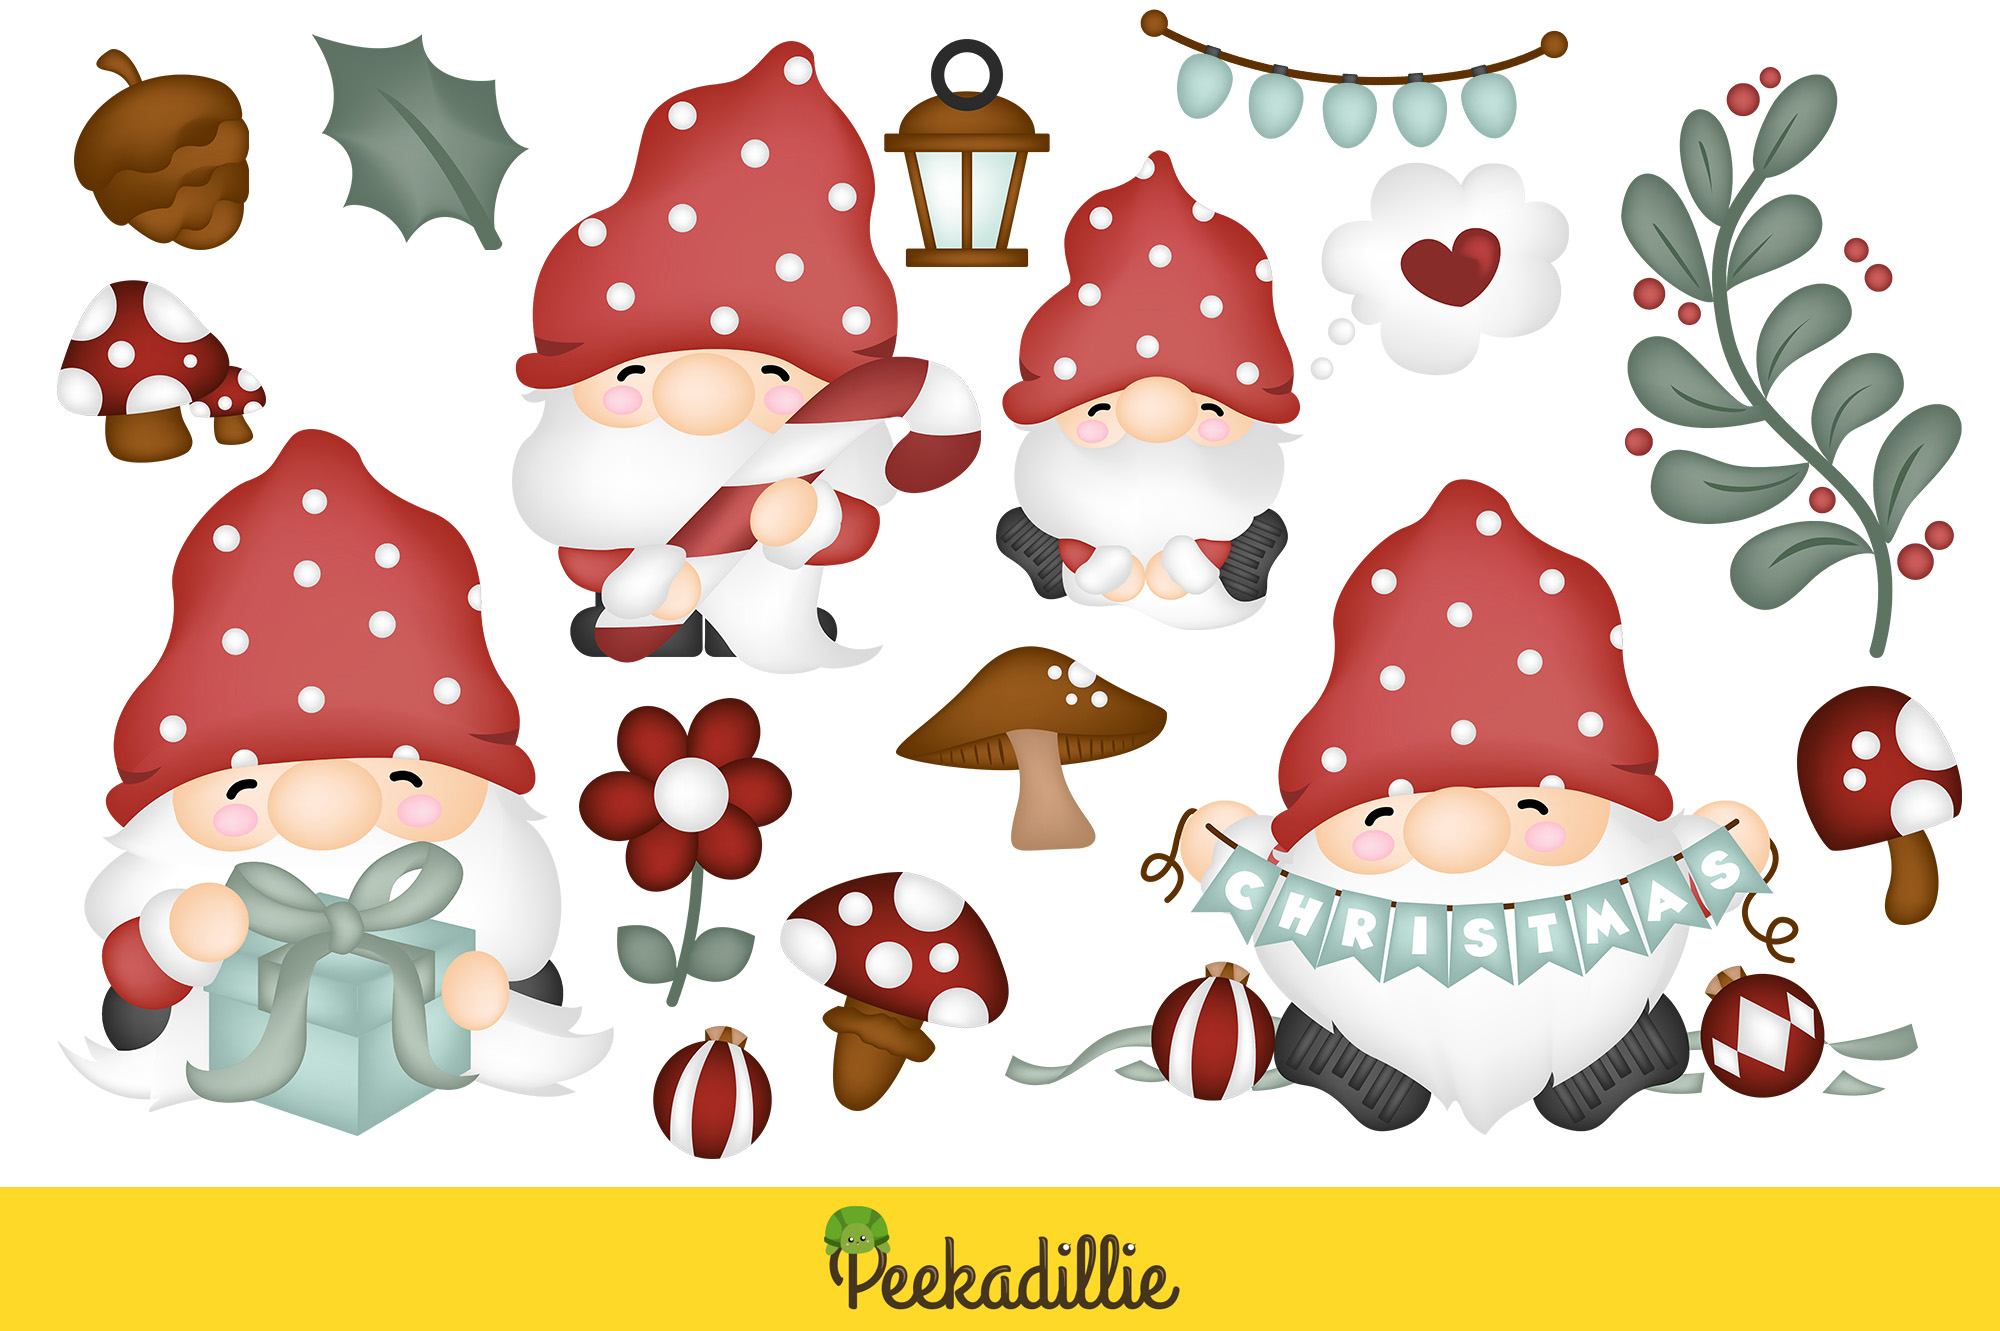 Pack of adorable images of Christmas gnomes.